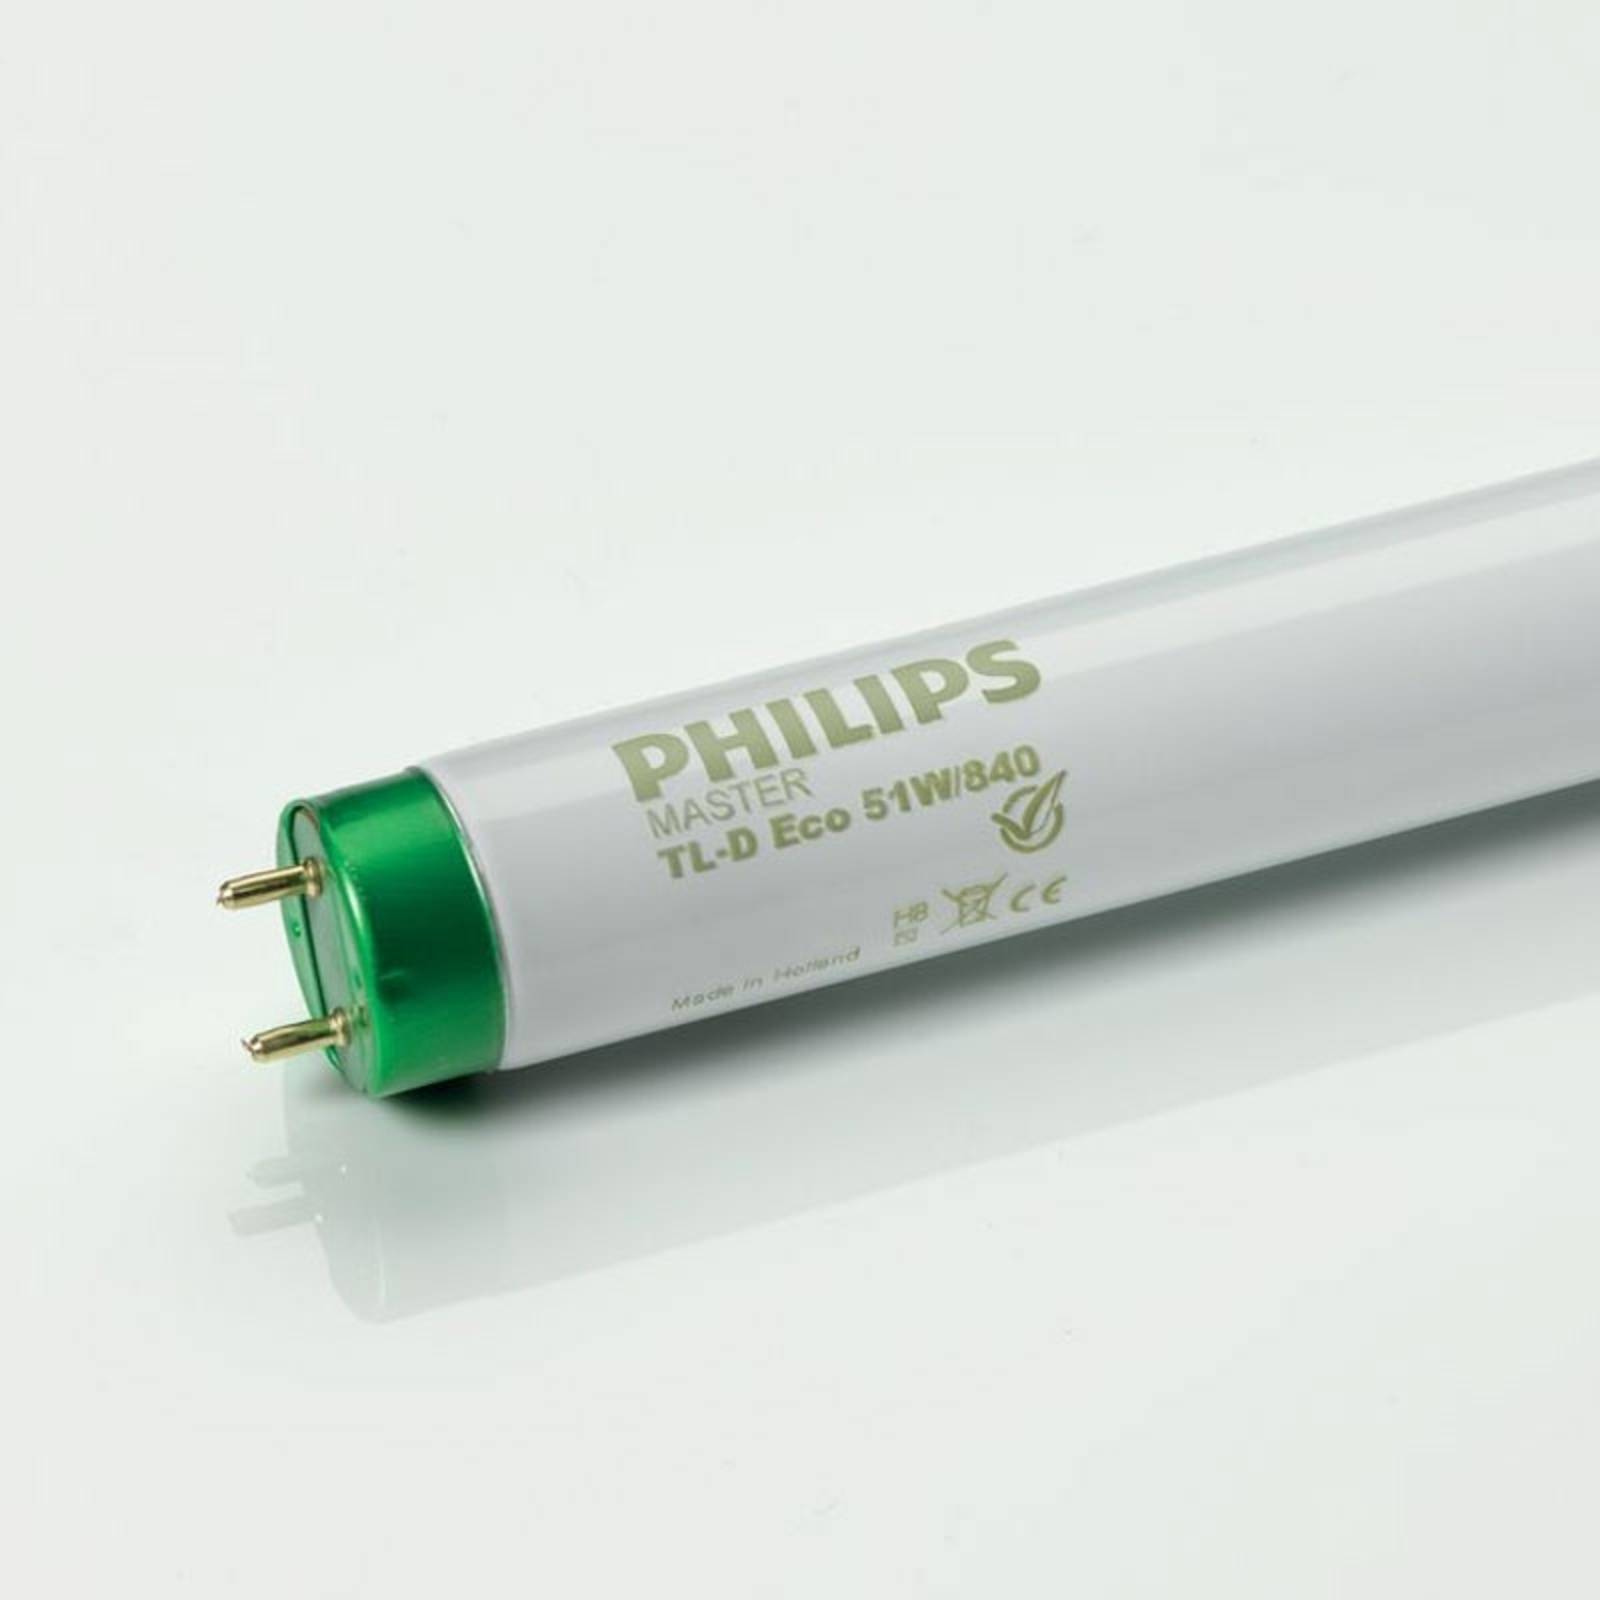 Philips G13 T8 32W 840 Master TL-D Eco